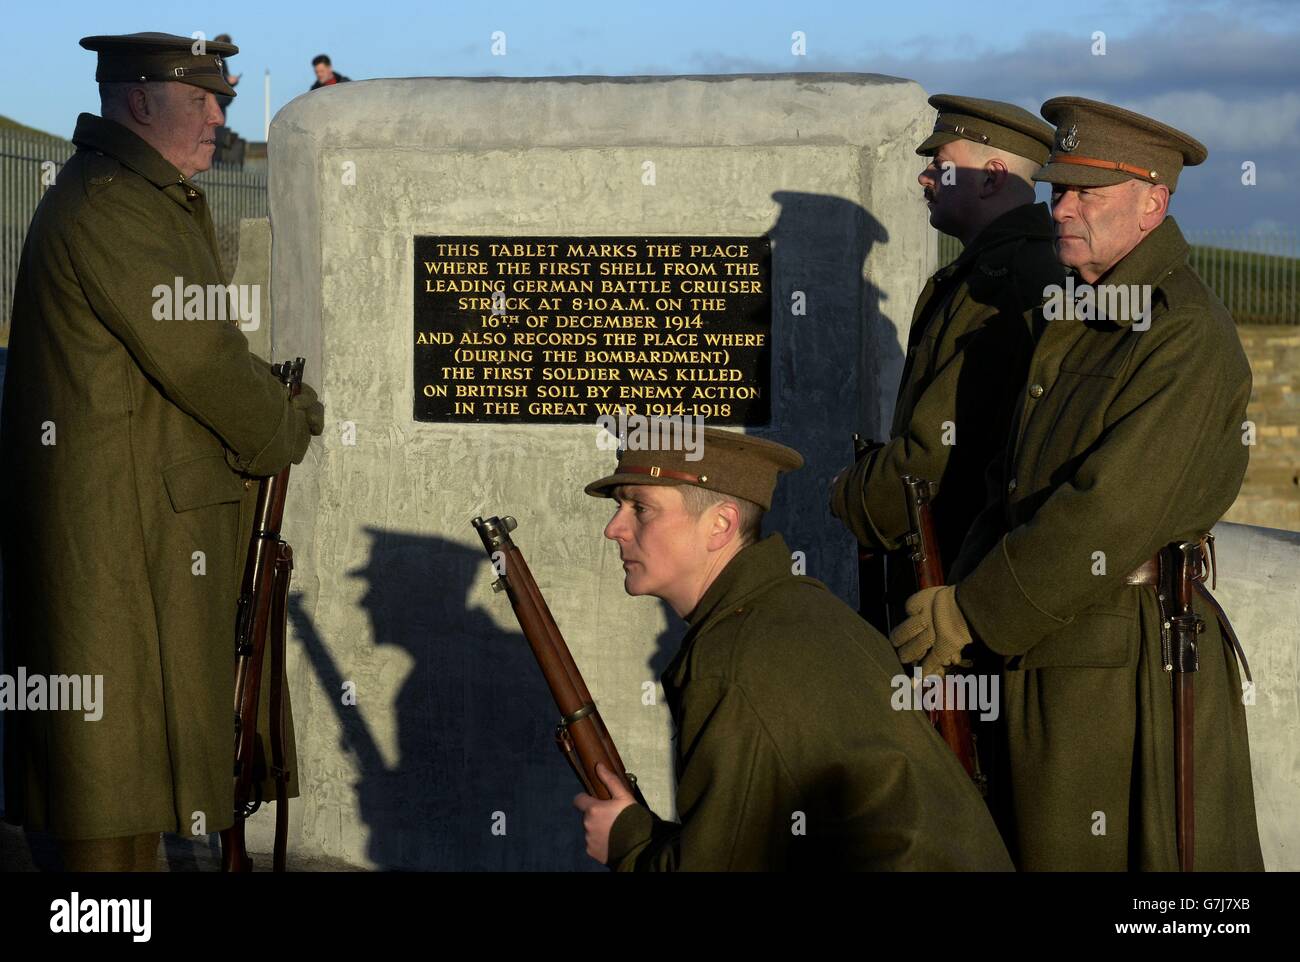 The Commemoration Society 18th Battalion Durham Light Infantry at the plaque in Hartlepool, as the town devastated by the 1914 German bombardment of the North East coast commemorates the 100th anniversary of the attack. Stock Photo